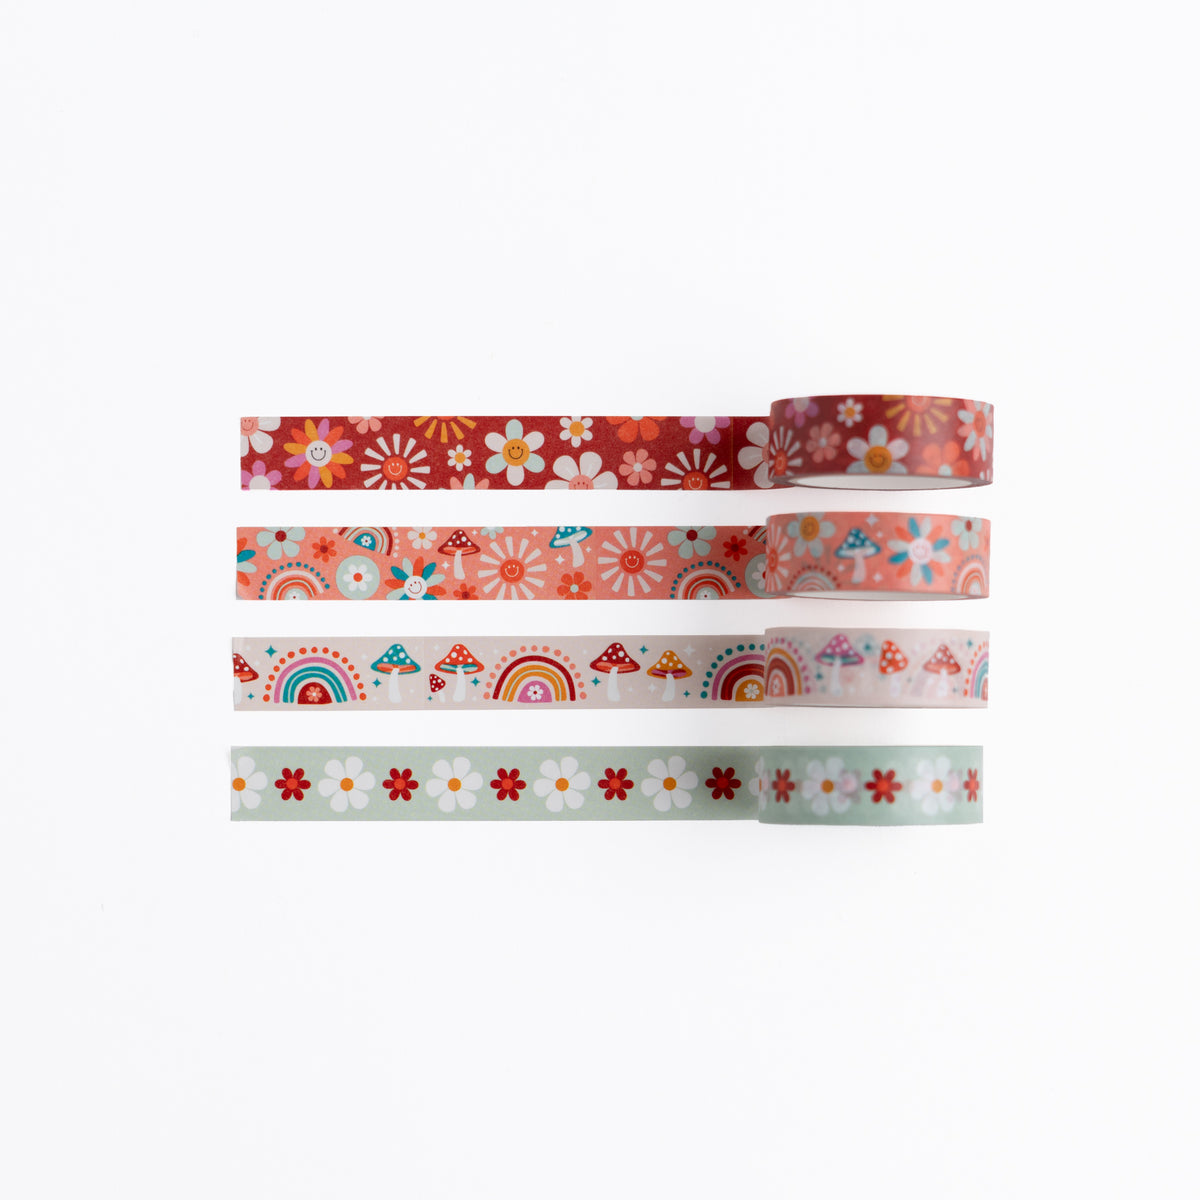 Denim & Daisies Washi Tape Set by Archer and Olive